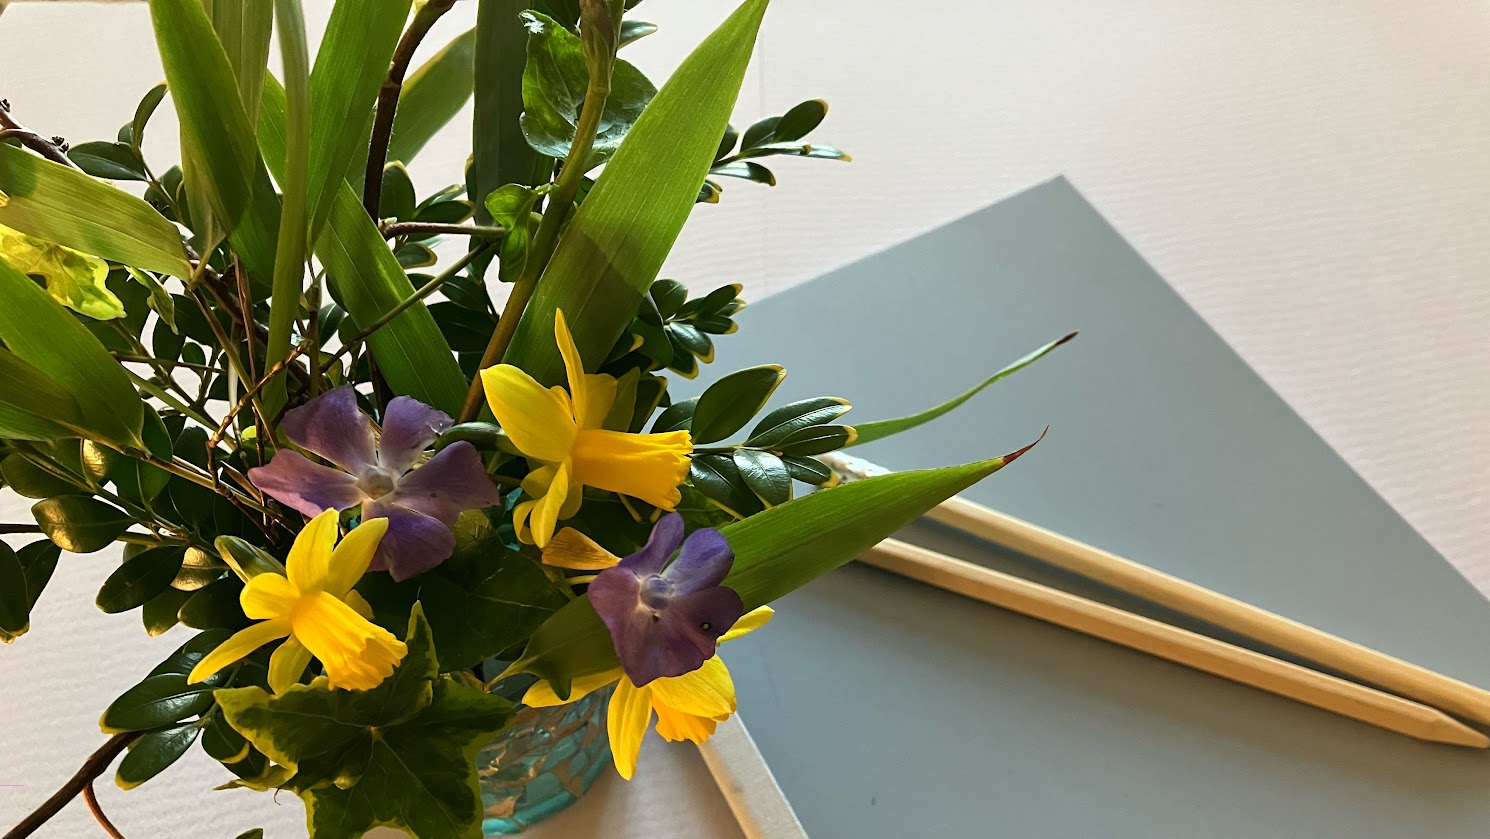 Spring flowers in a small vase, with a closed notebook and a pencil.